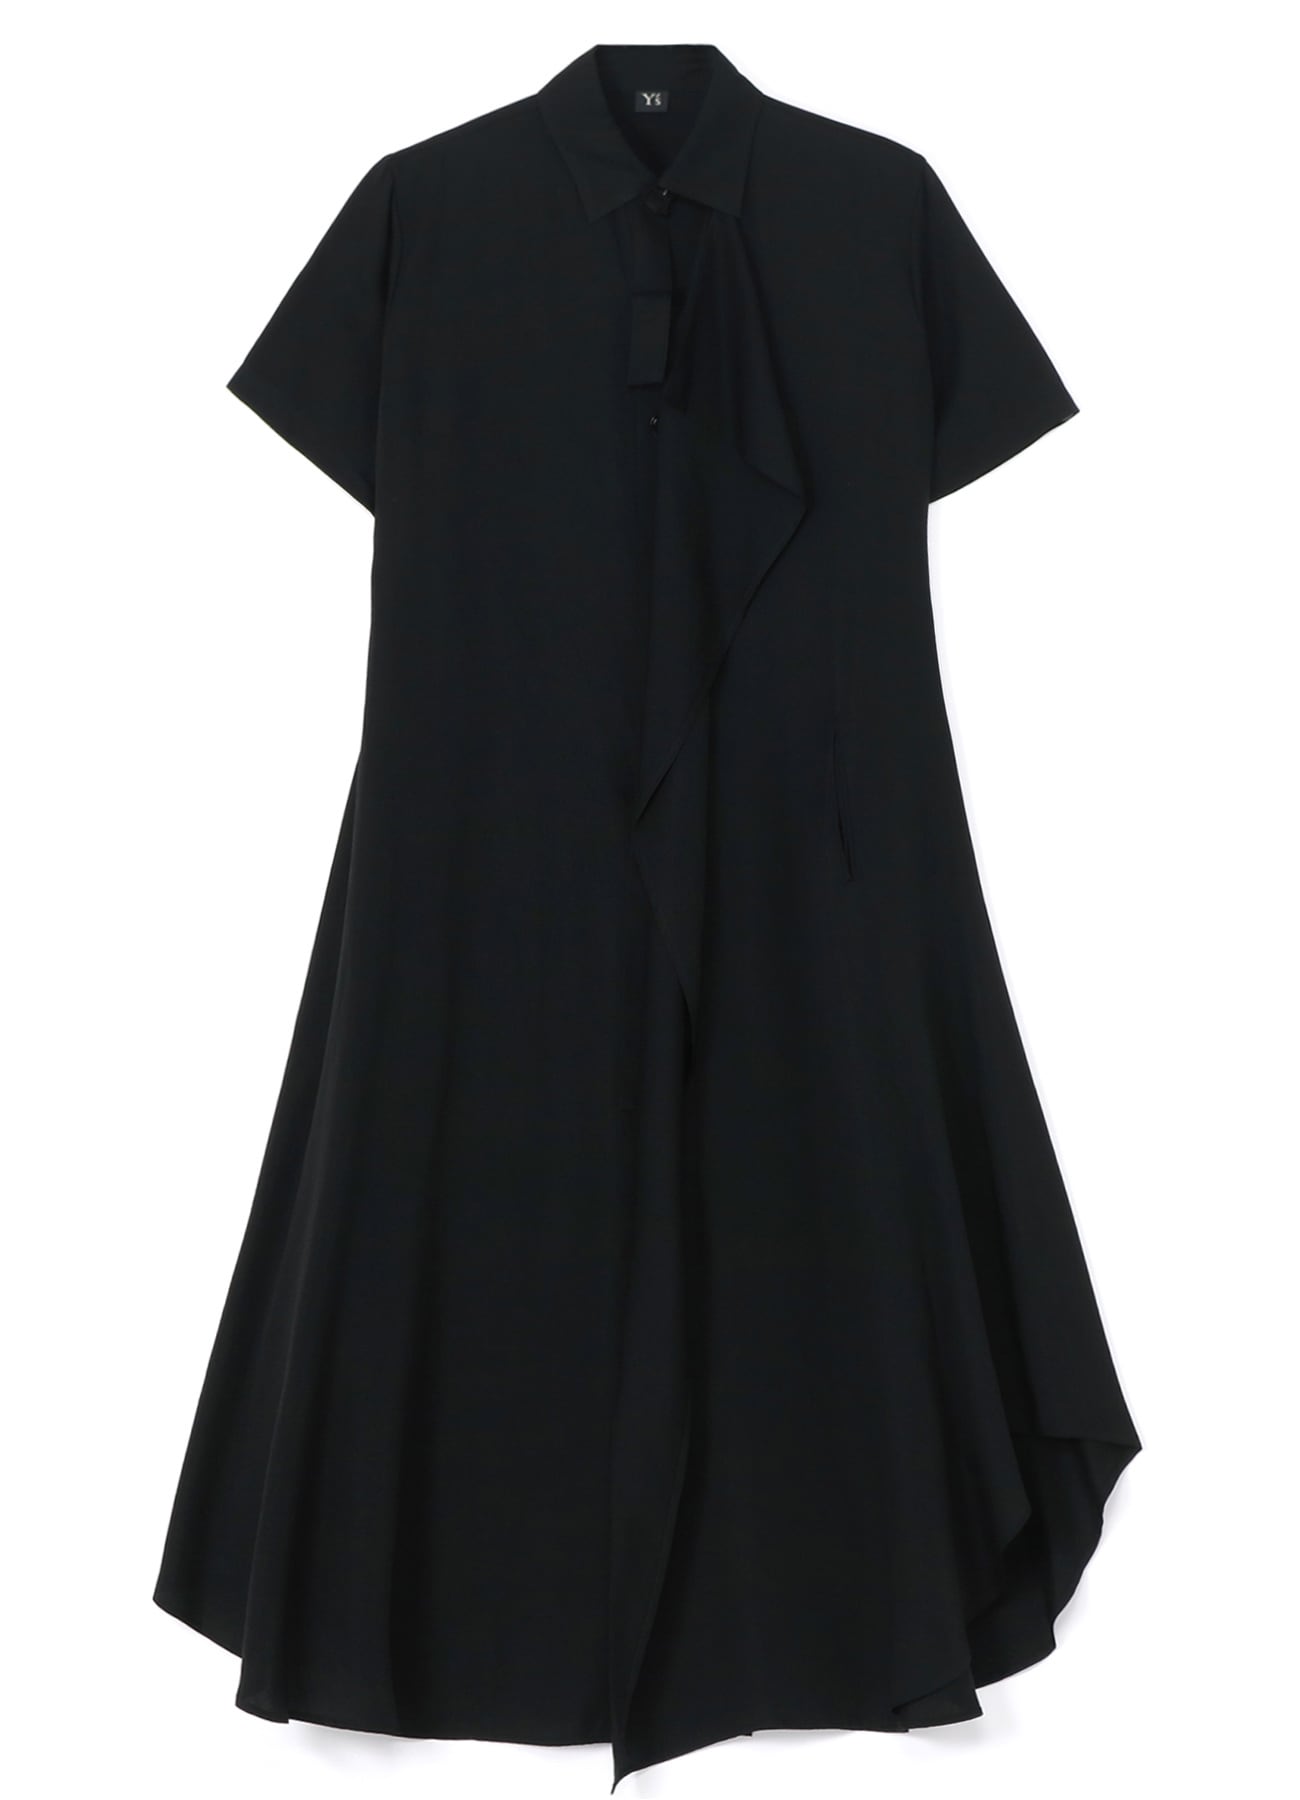 CUPRO DUNGAREE TWILL LEFT HANGING CLOTH DRESS(XS Black): Y's｜THE 